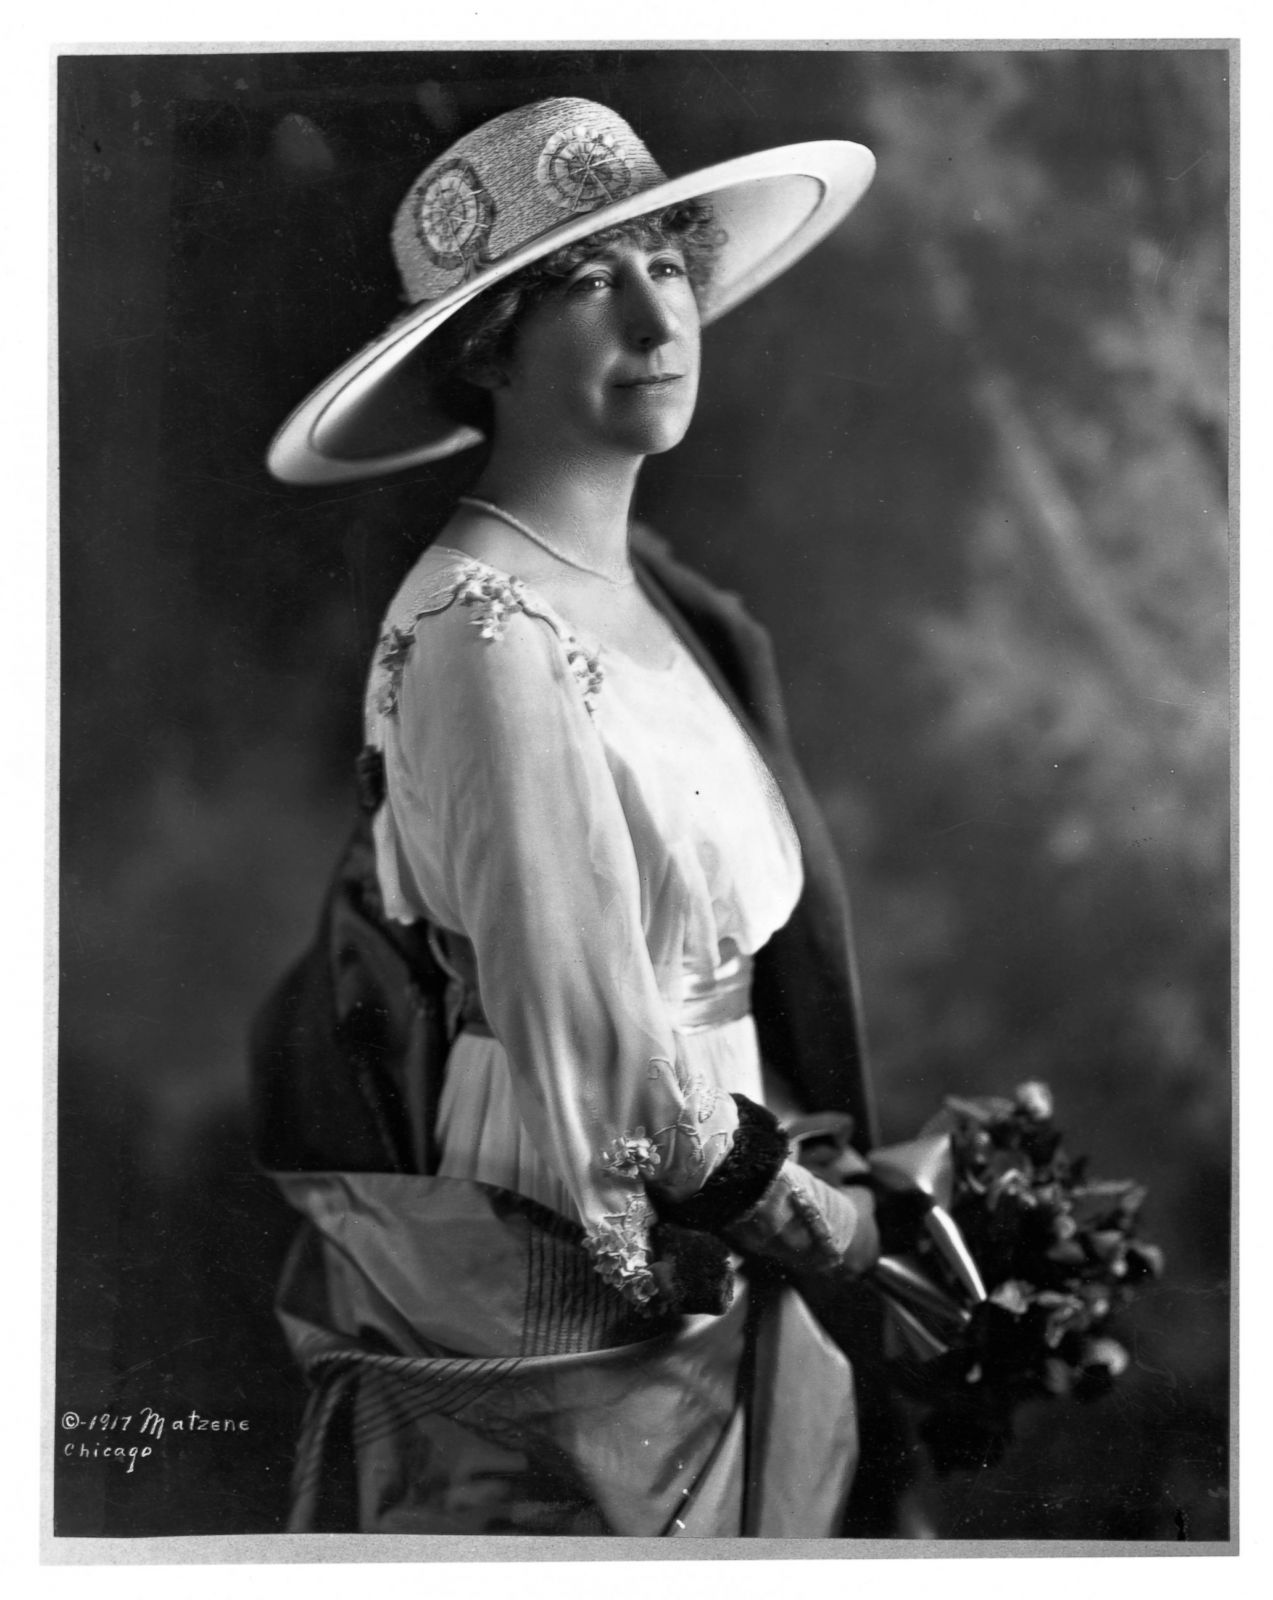 Jeannette Rankin Picture | Women who broke the political glass ceiling - ABC News1273 x 1600